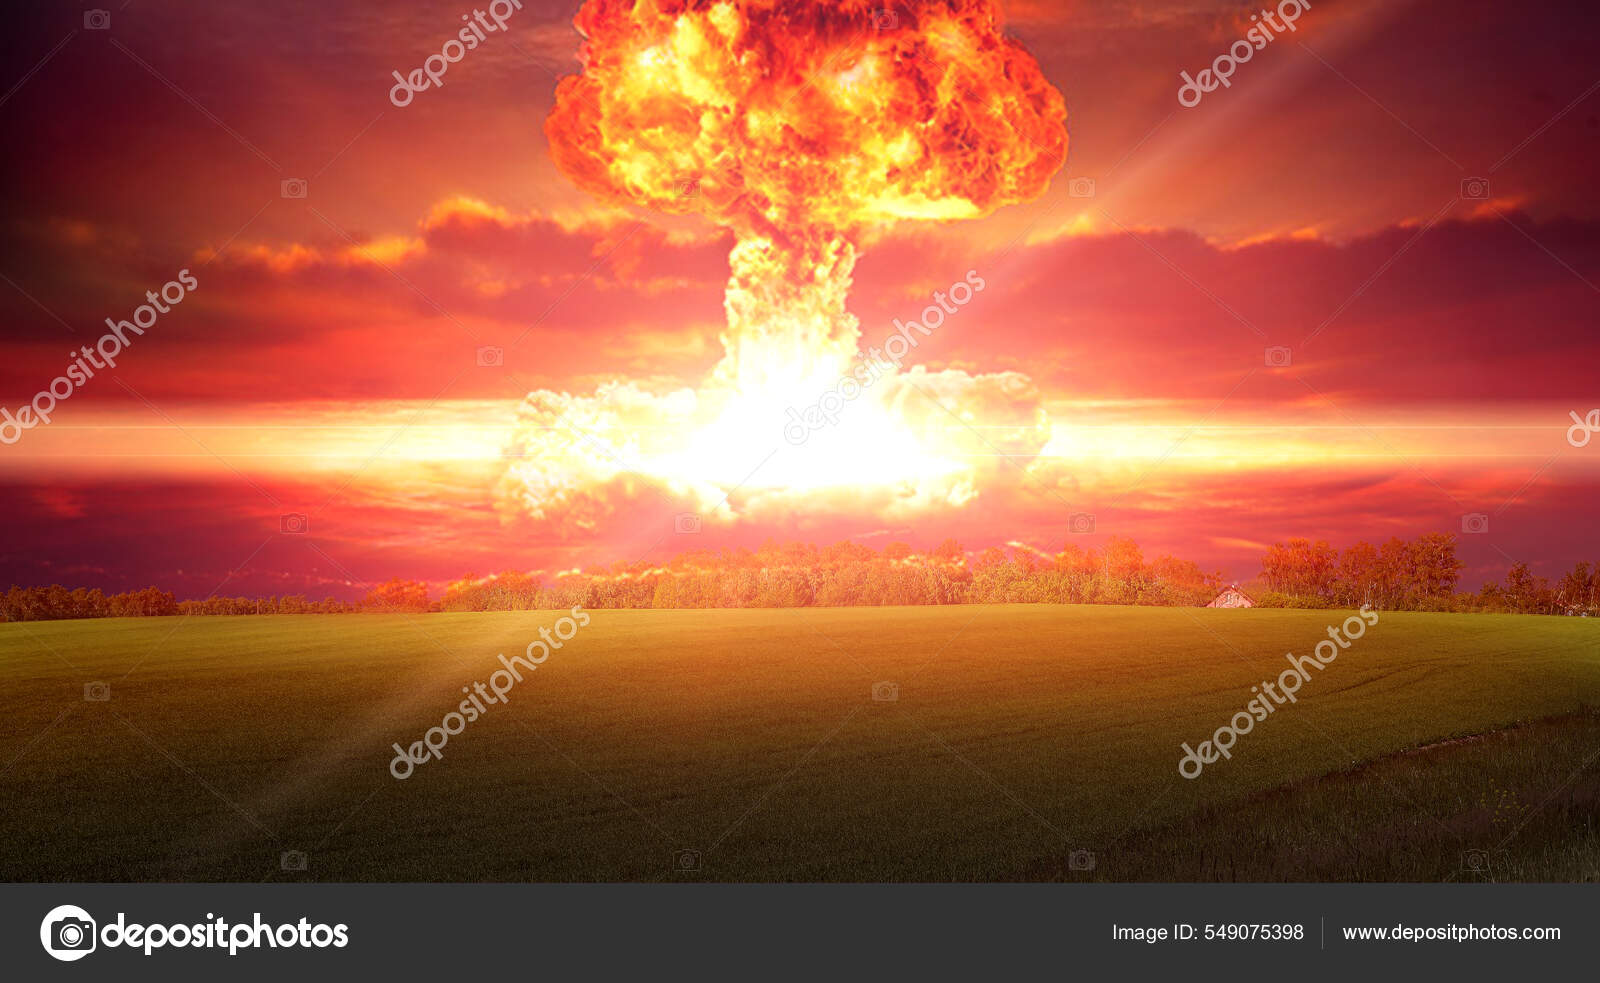 nuclear missile explosion wallpaper